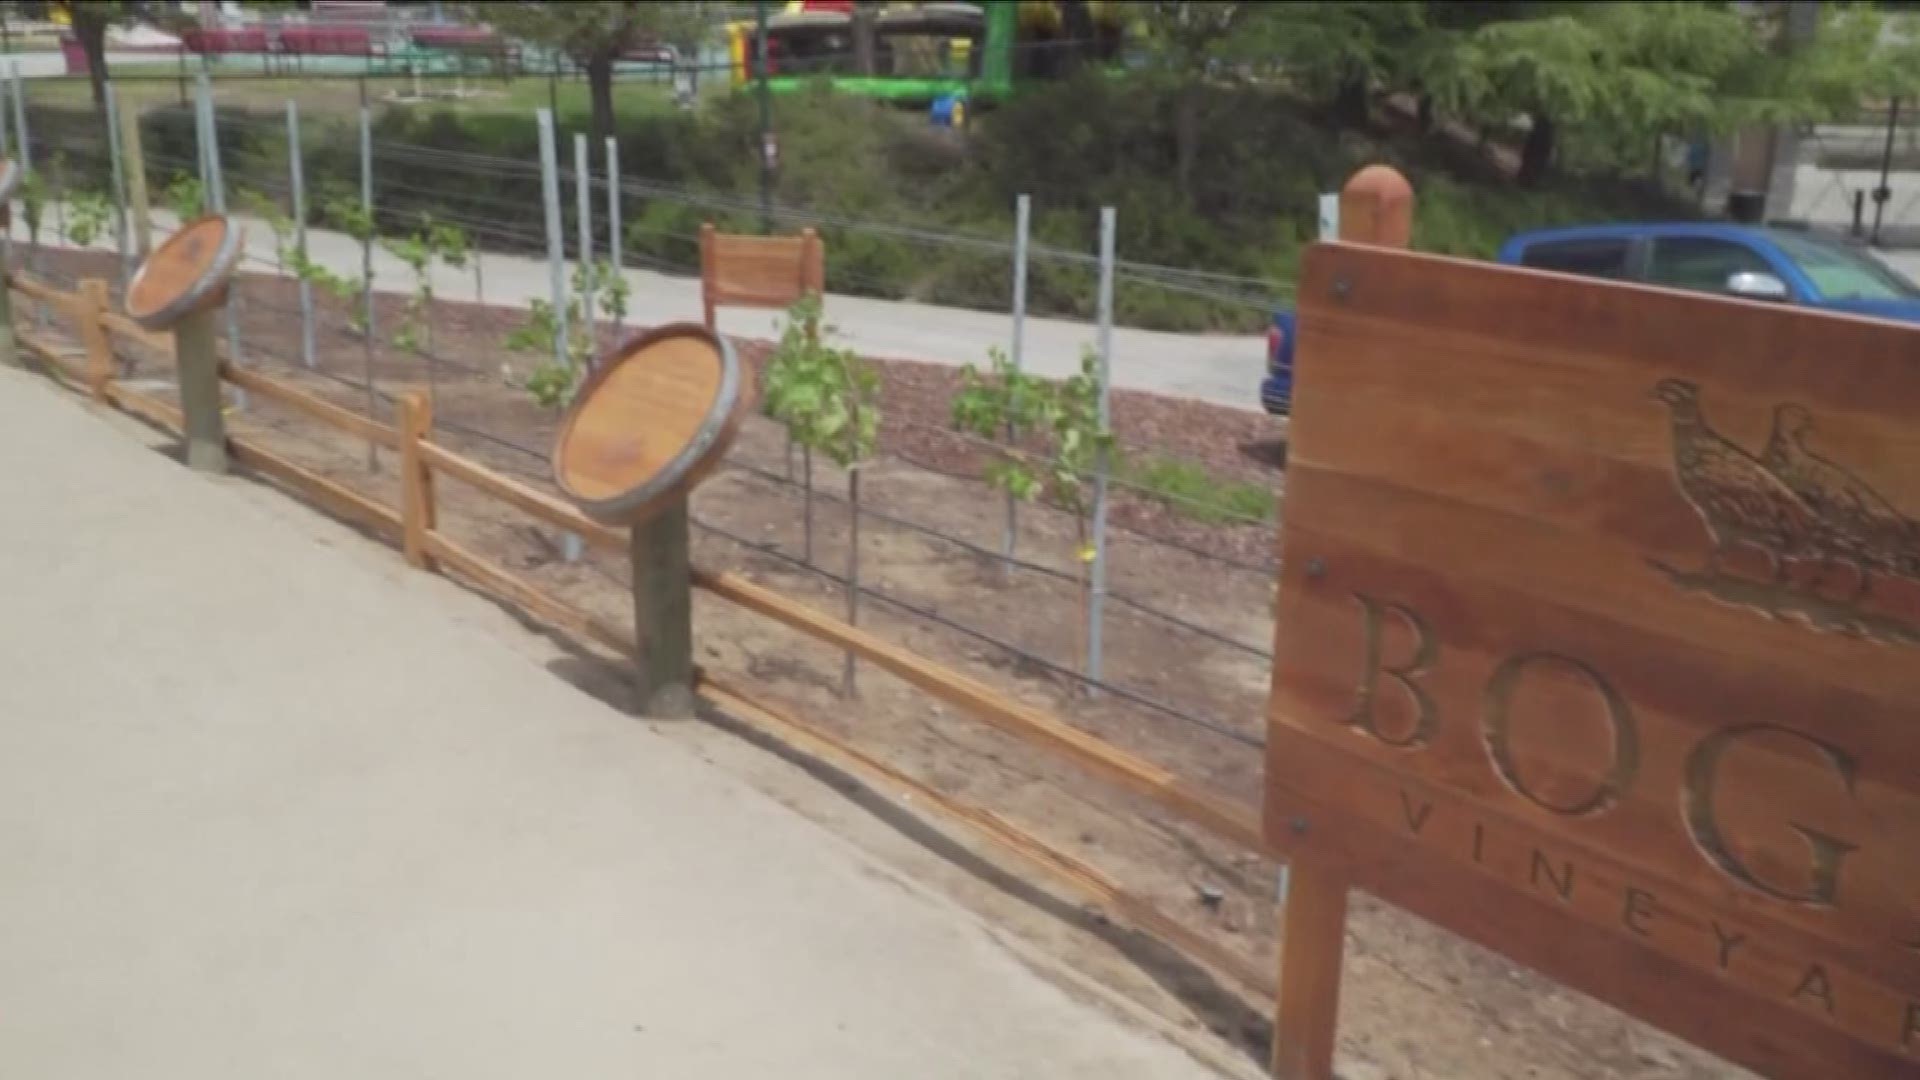 Raley's Field introduces the first live vineyard inside a professional baseball stadium. 